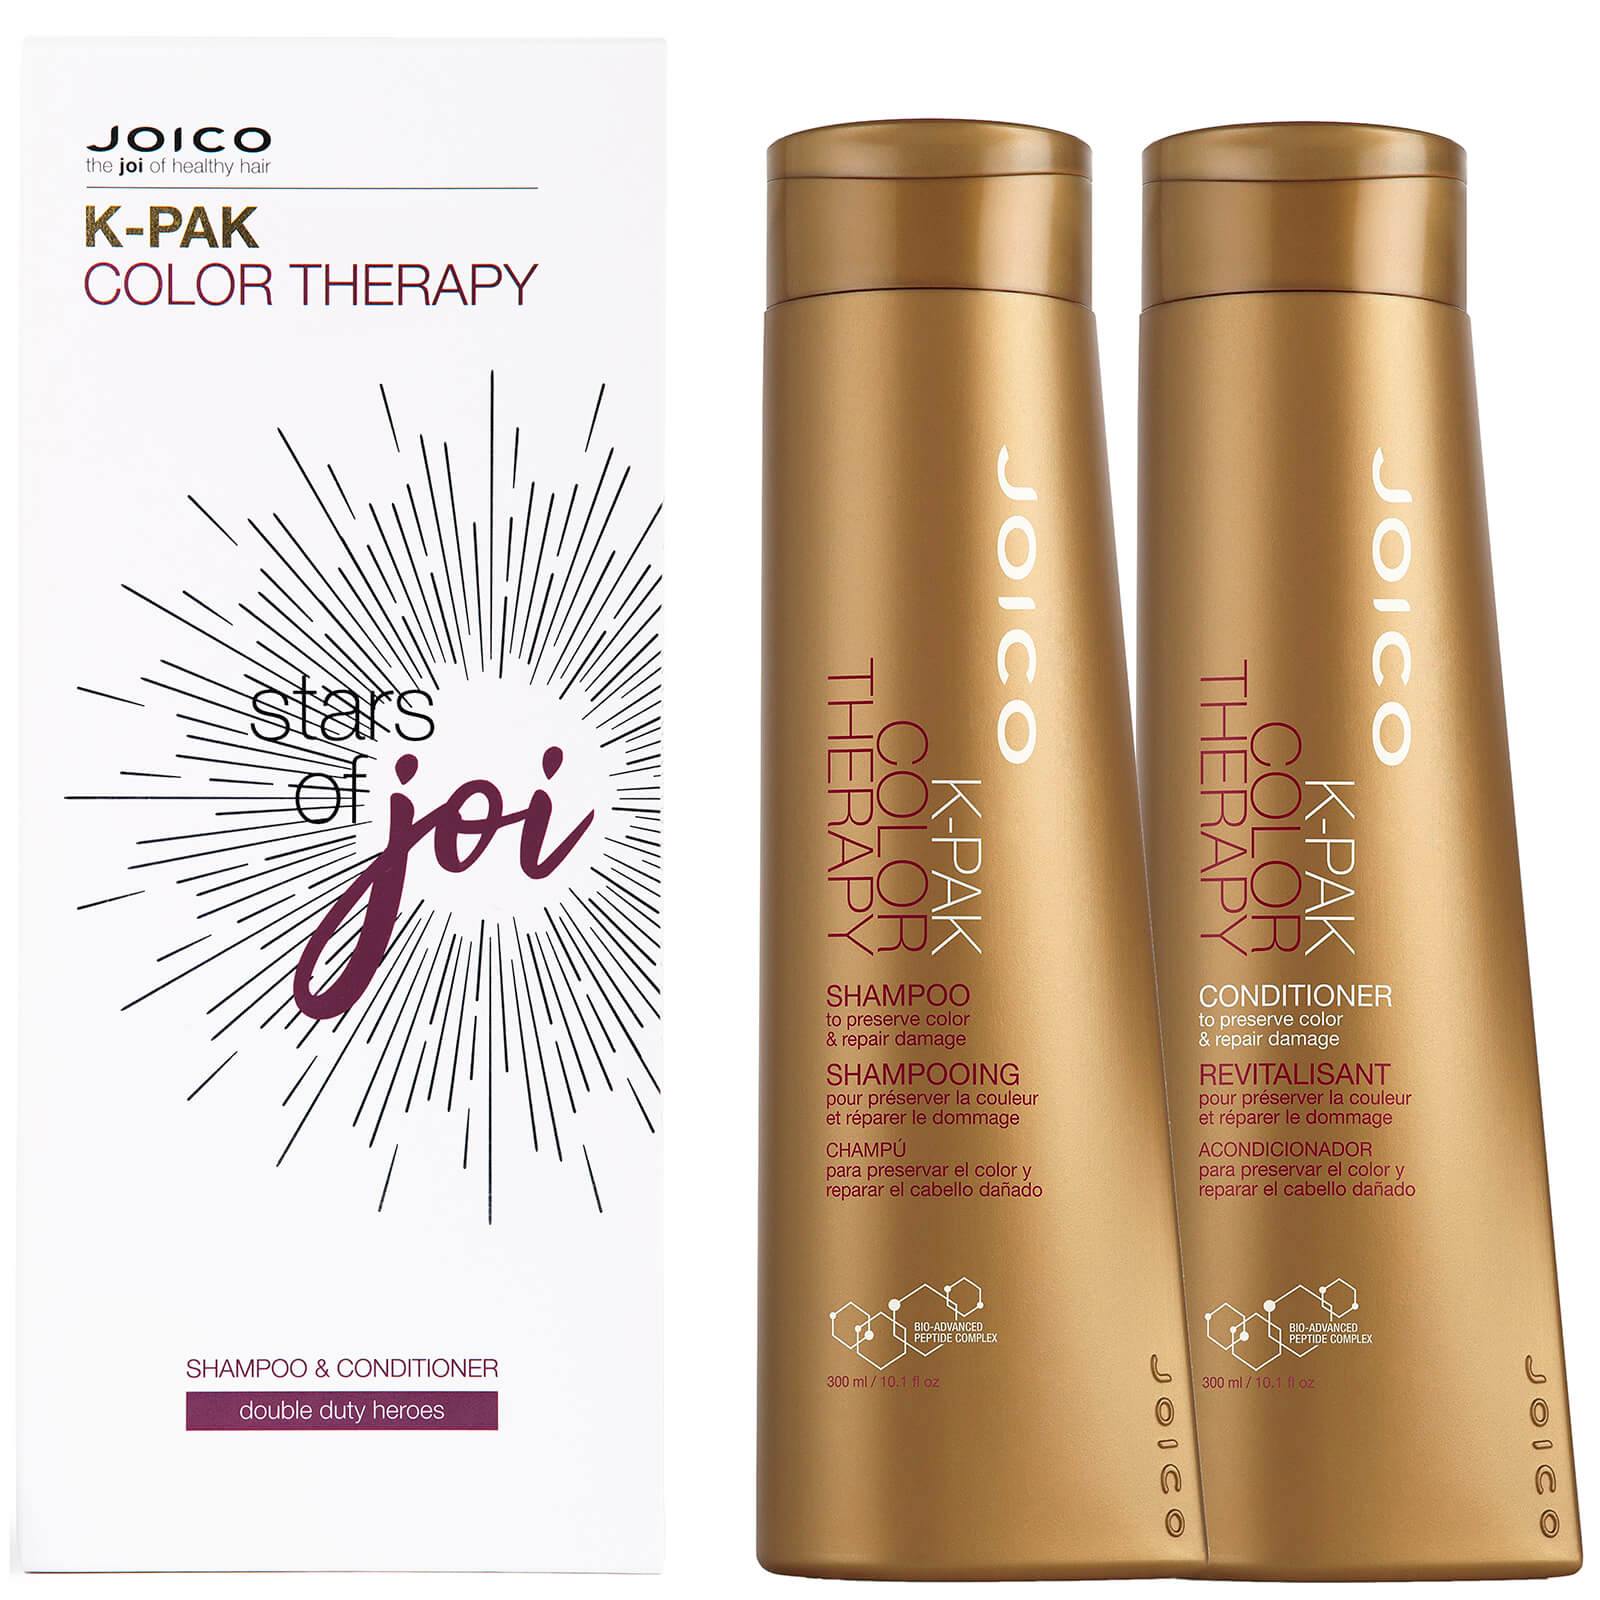 Joico Stars of Joi K-Pak Color Therapy Shampoo and Conditioner 300ml